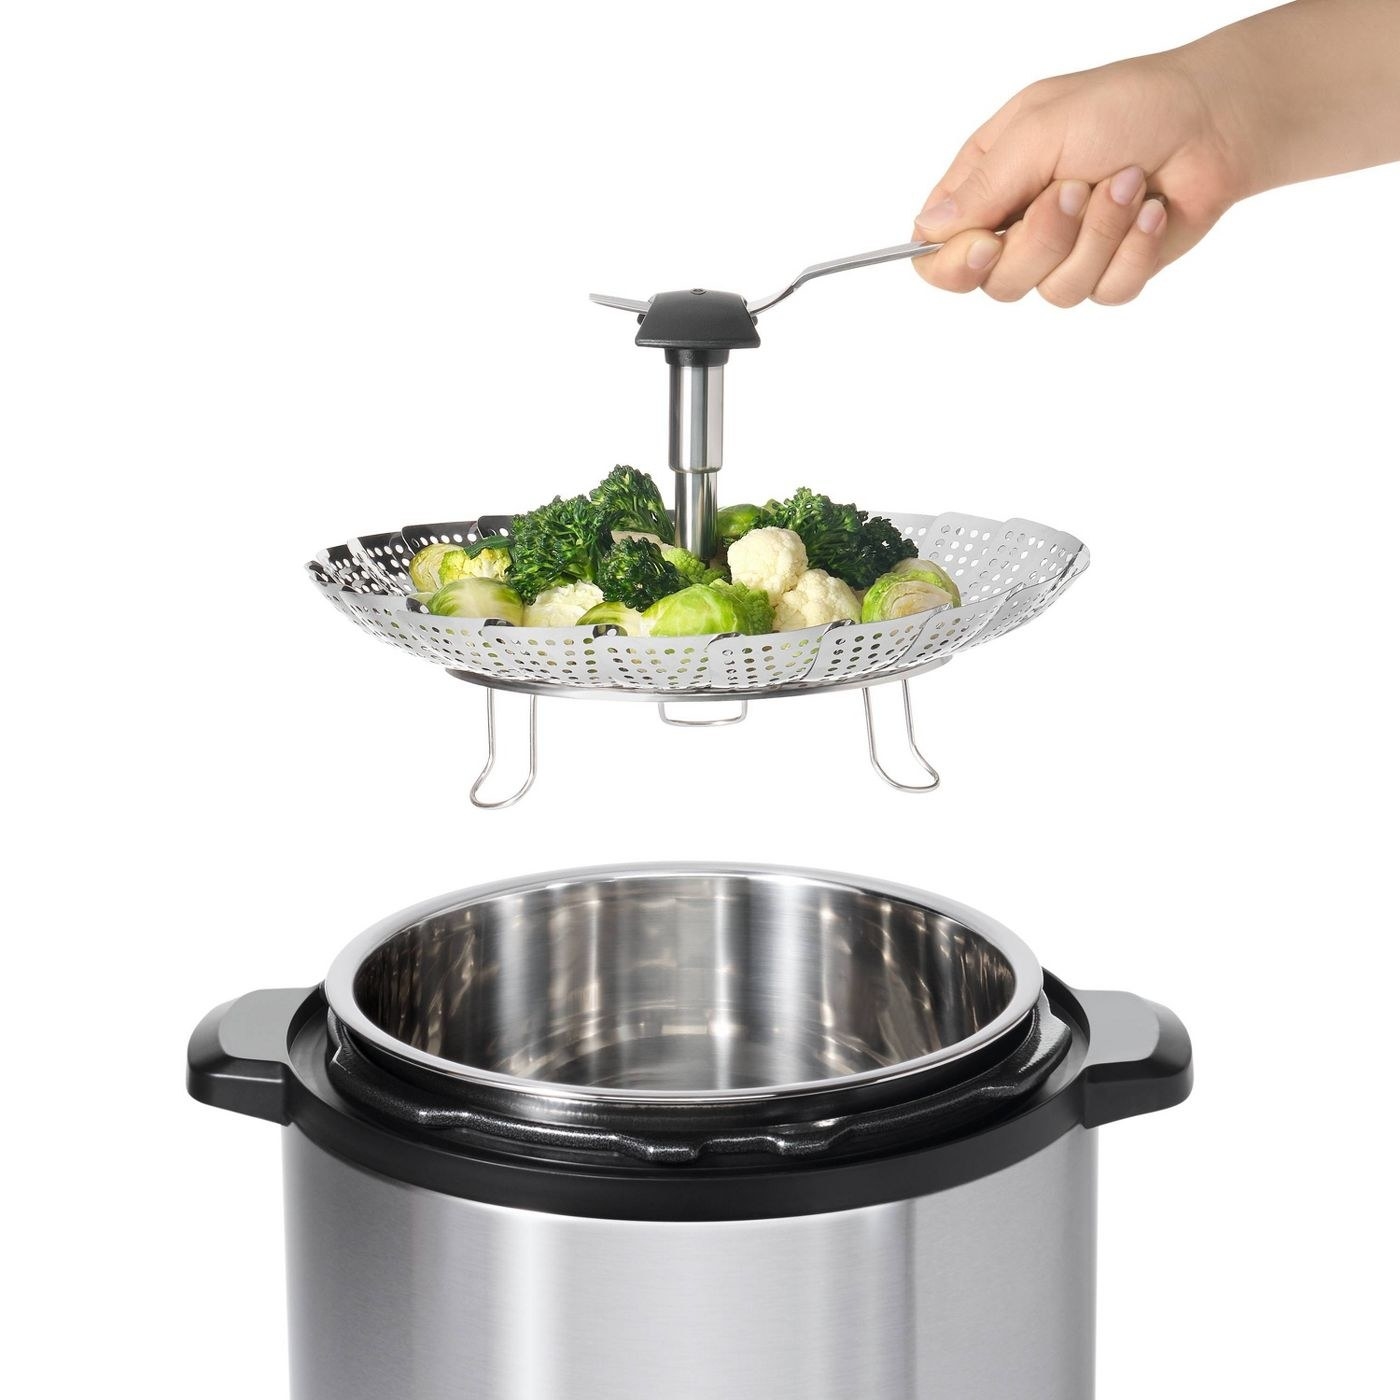 model holding a stainless steel steamer with vegetables over a pot of water